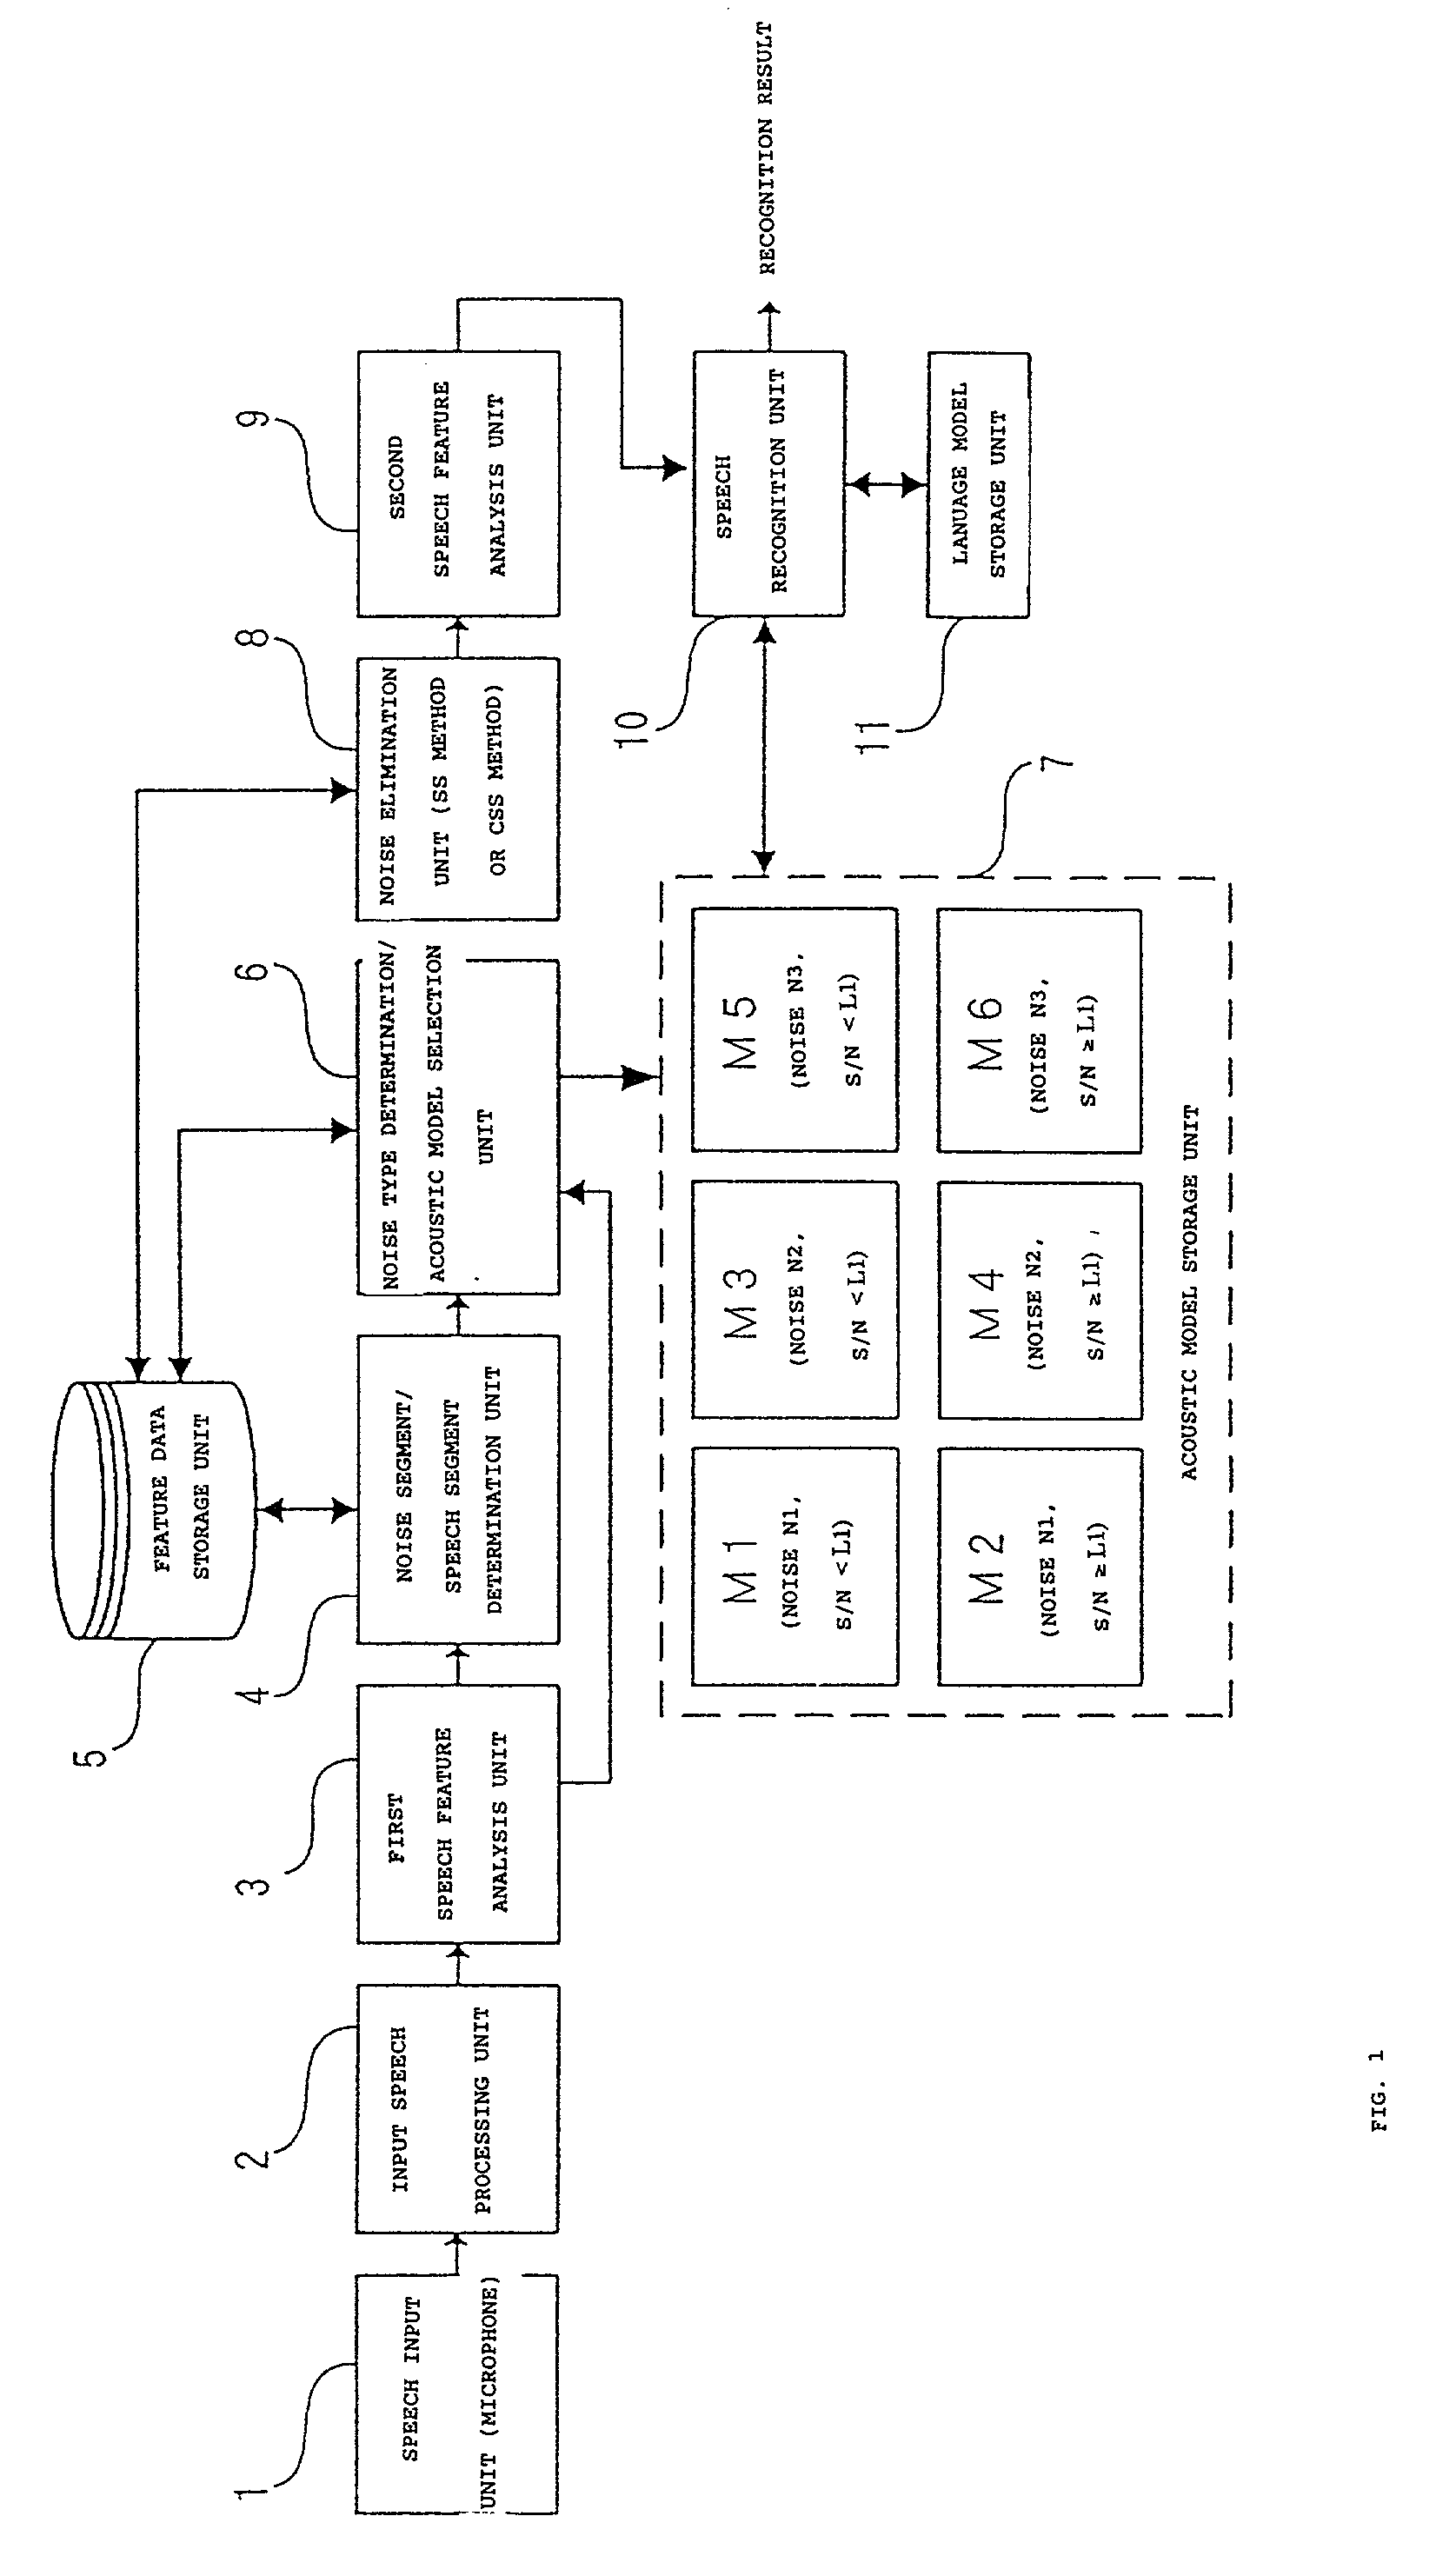 Speech recognition method, program and apparatus using multiple acoustic models